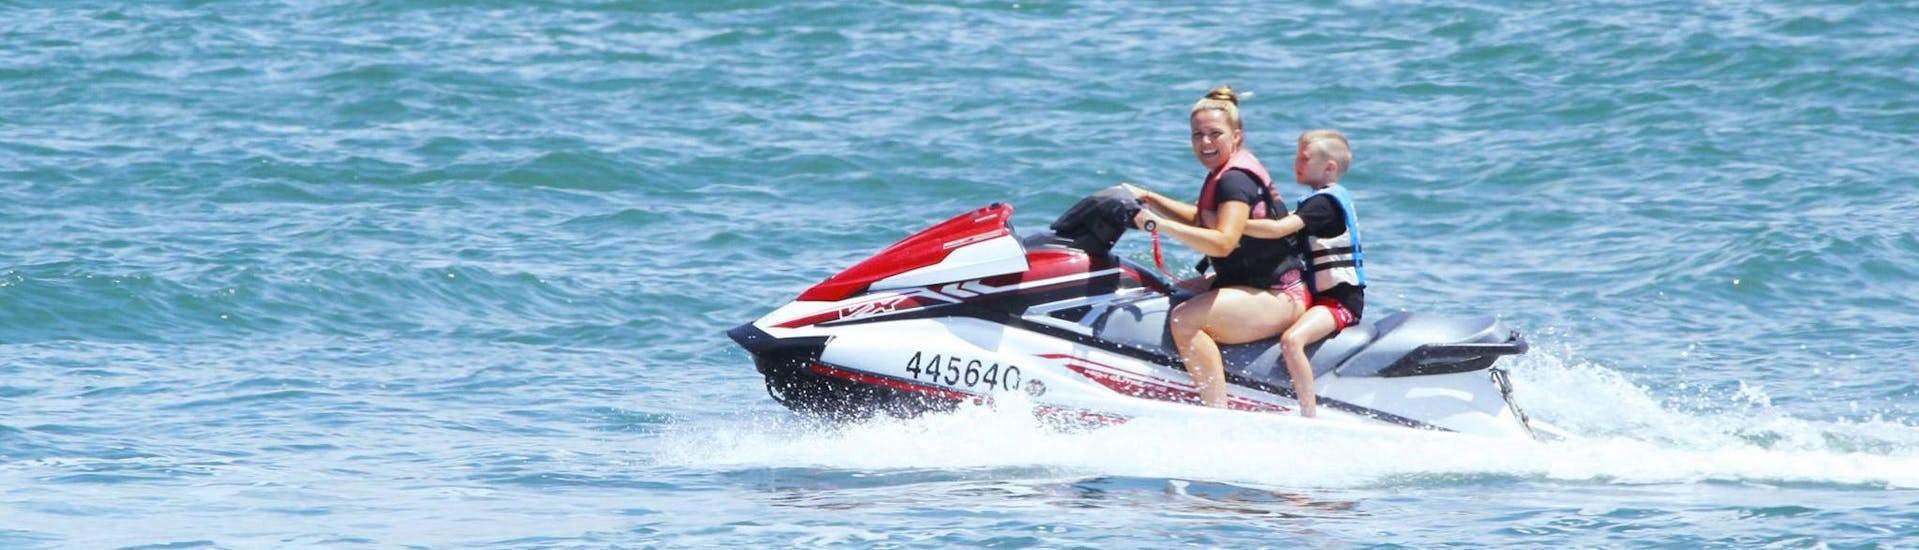 Under a supervision of an experienced instructor from Gold Coast Watersports, a mother is enjoying a jet ski ride with her son during the Jet Ski in Gold Coast - Hire.